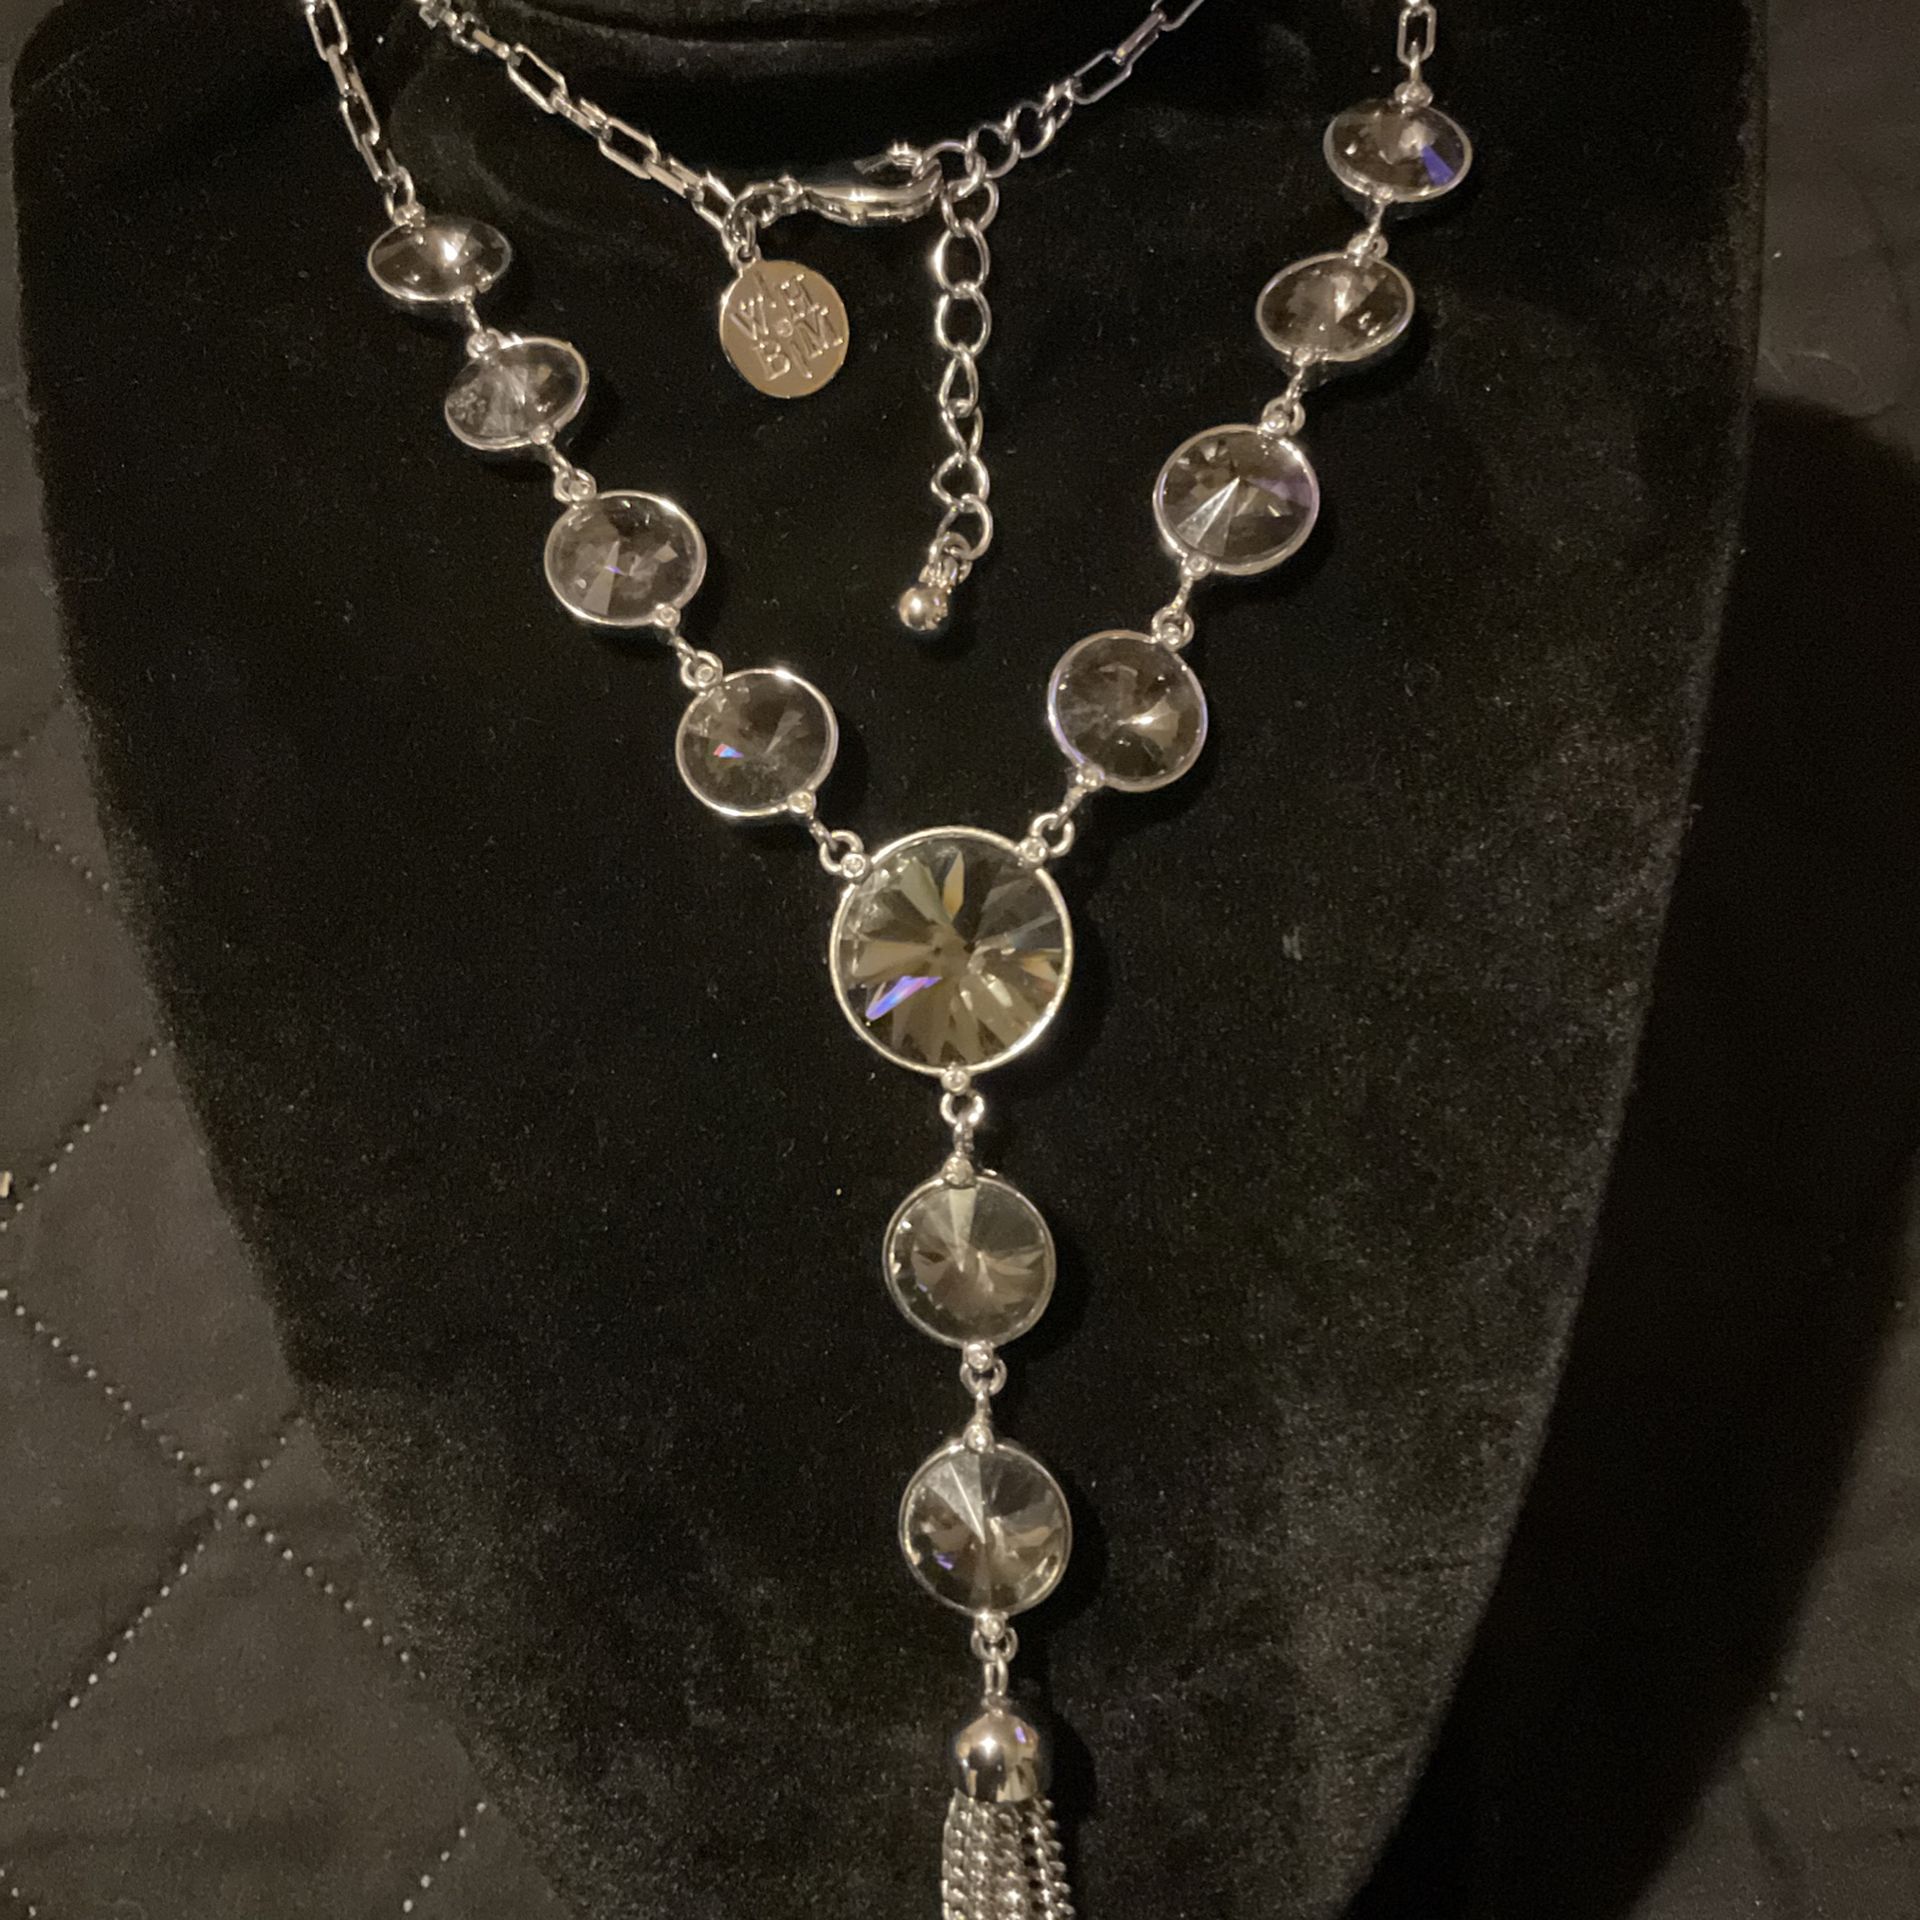 Beautiful 28” SilverTone Necklace With Sparkling Grey Rhinestones And Dangling Chain Tassel,By WB/HM